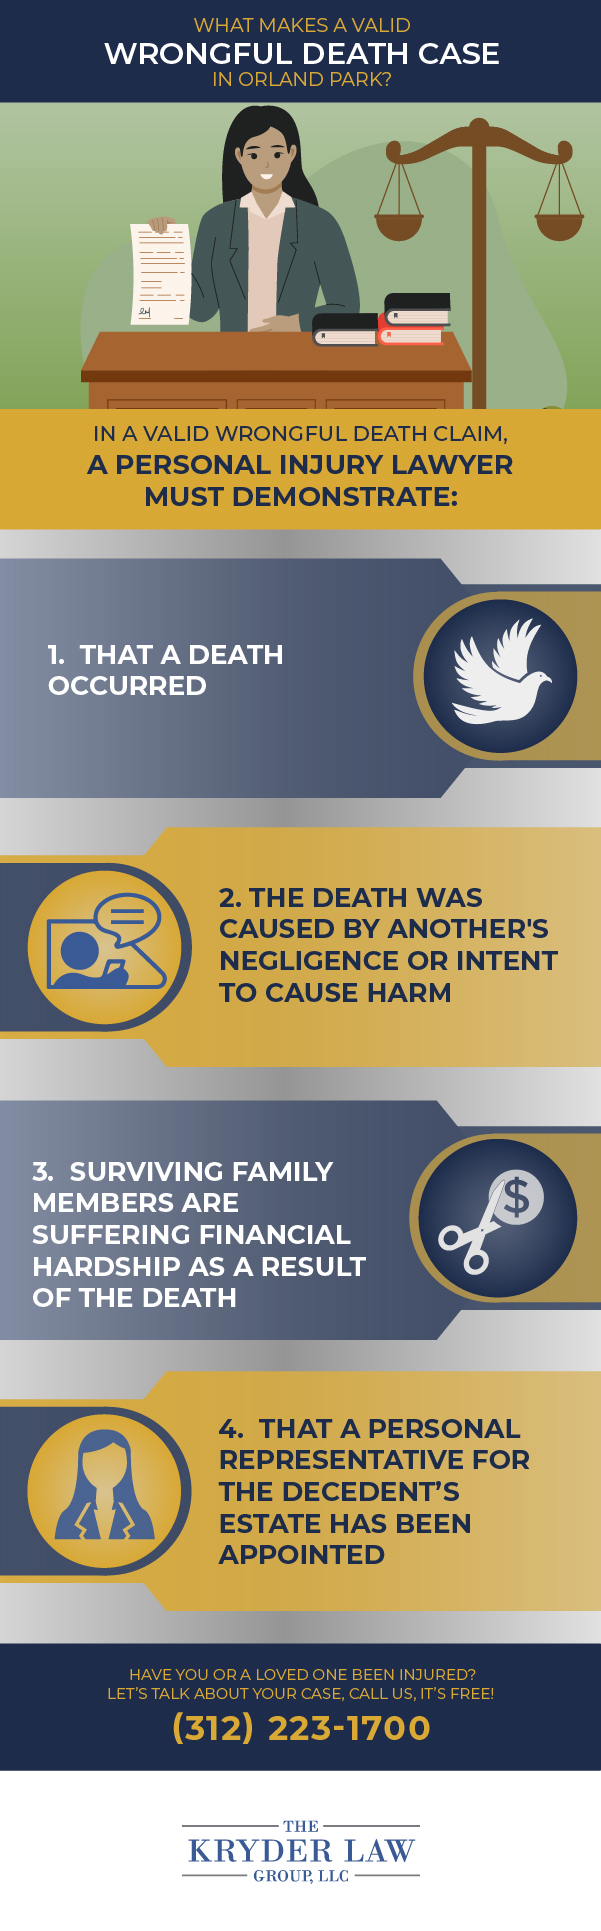 What Makes a Valid Wrongful Death Case in Orland Park?